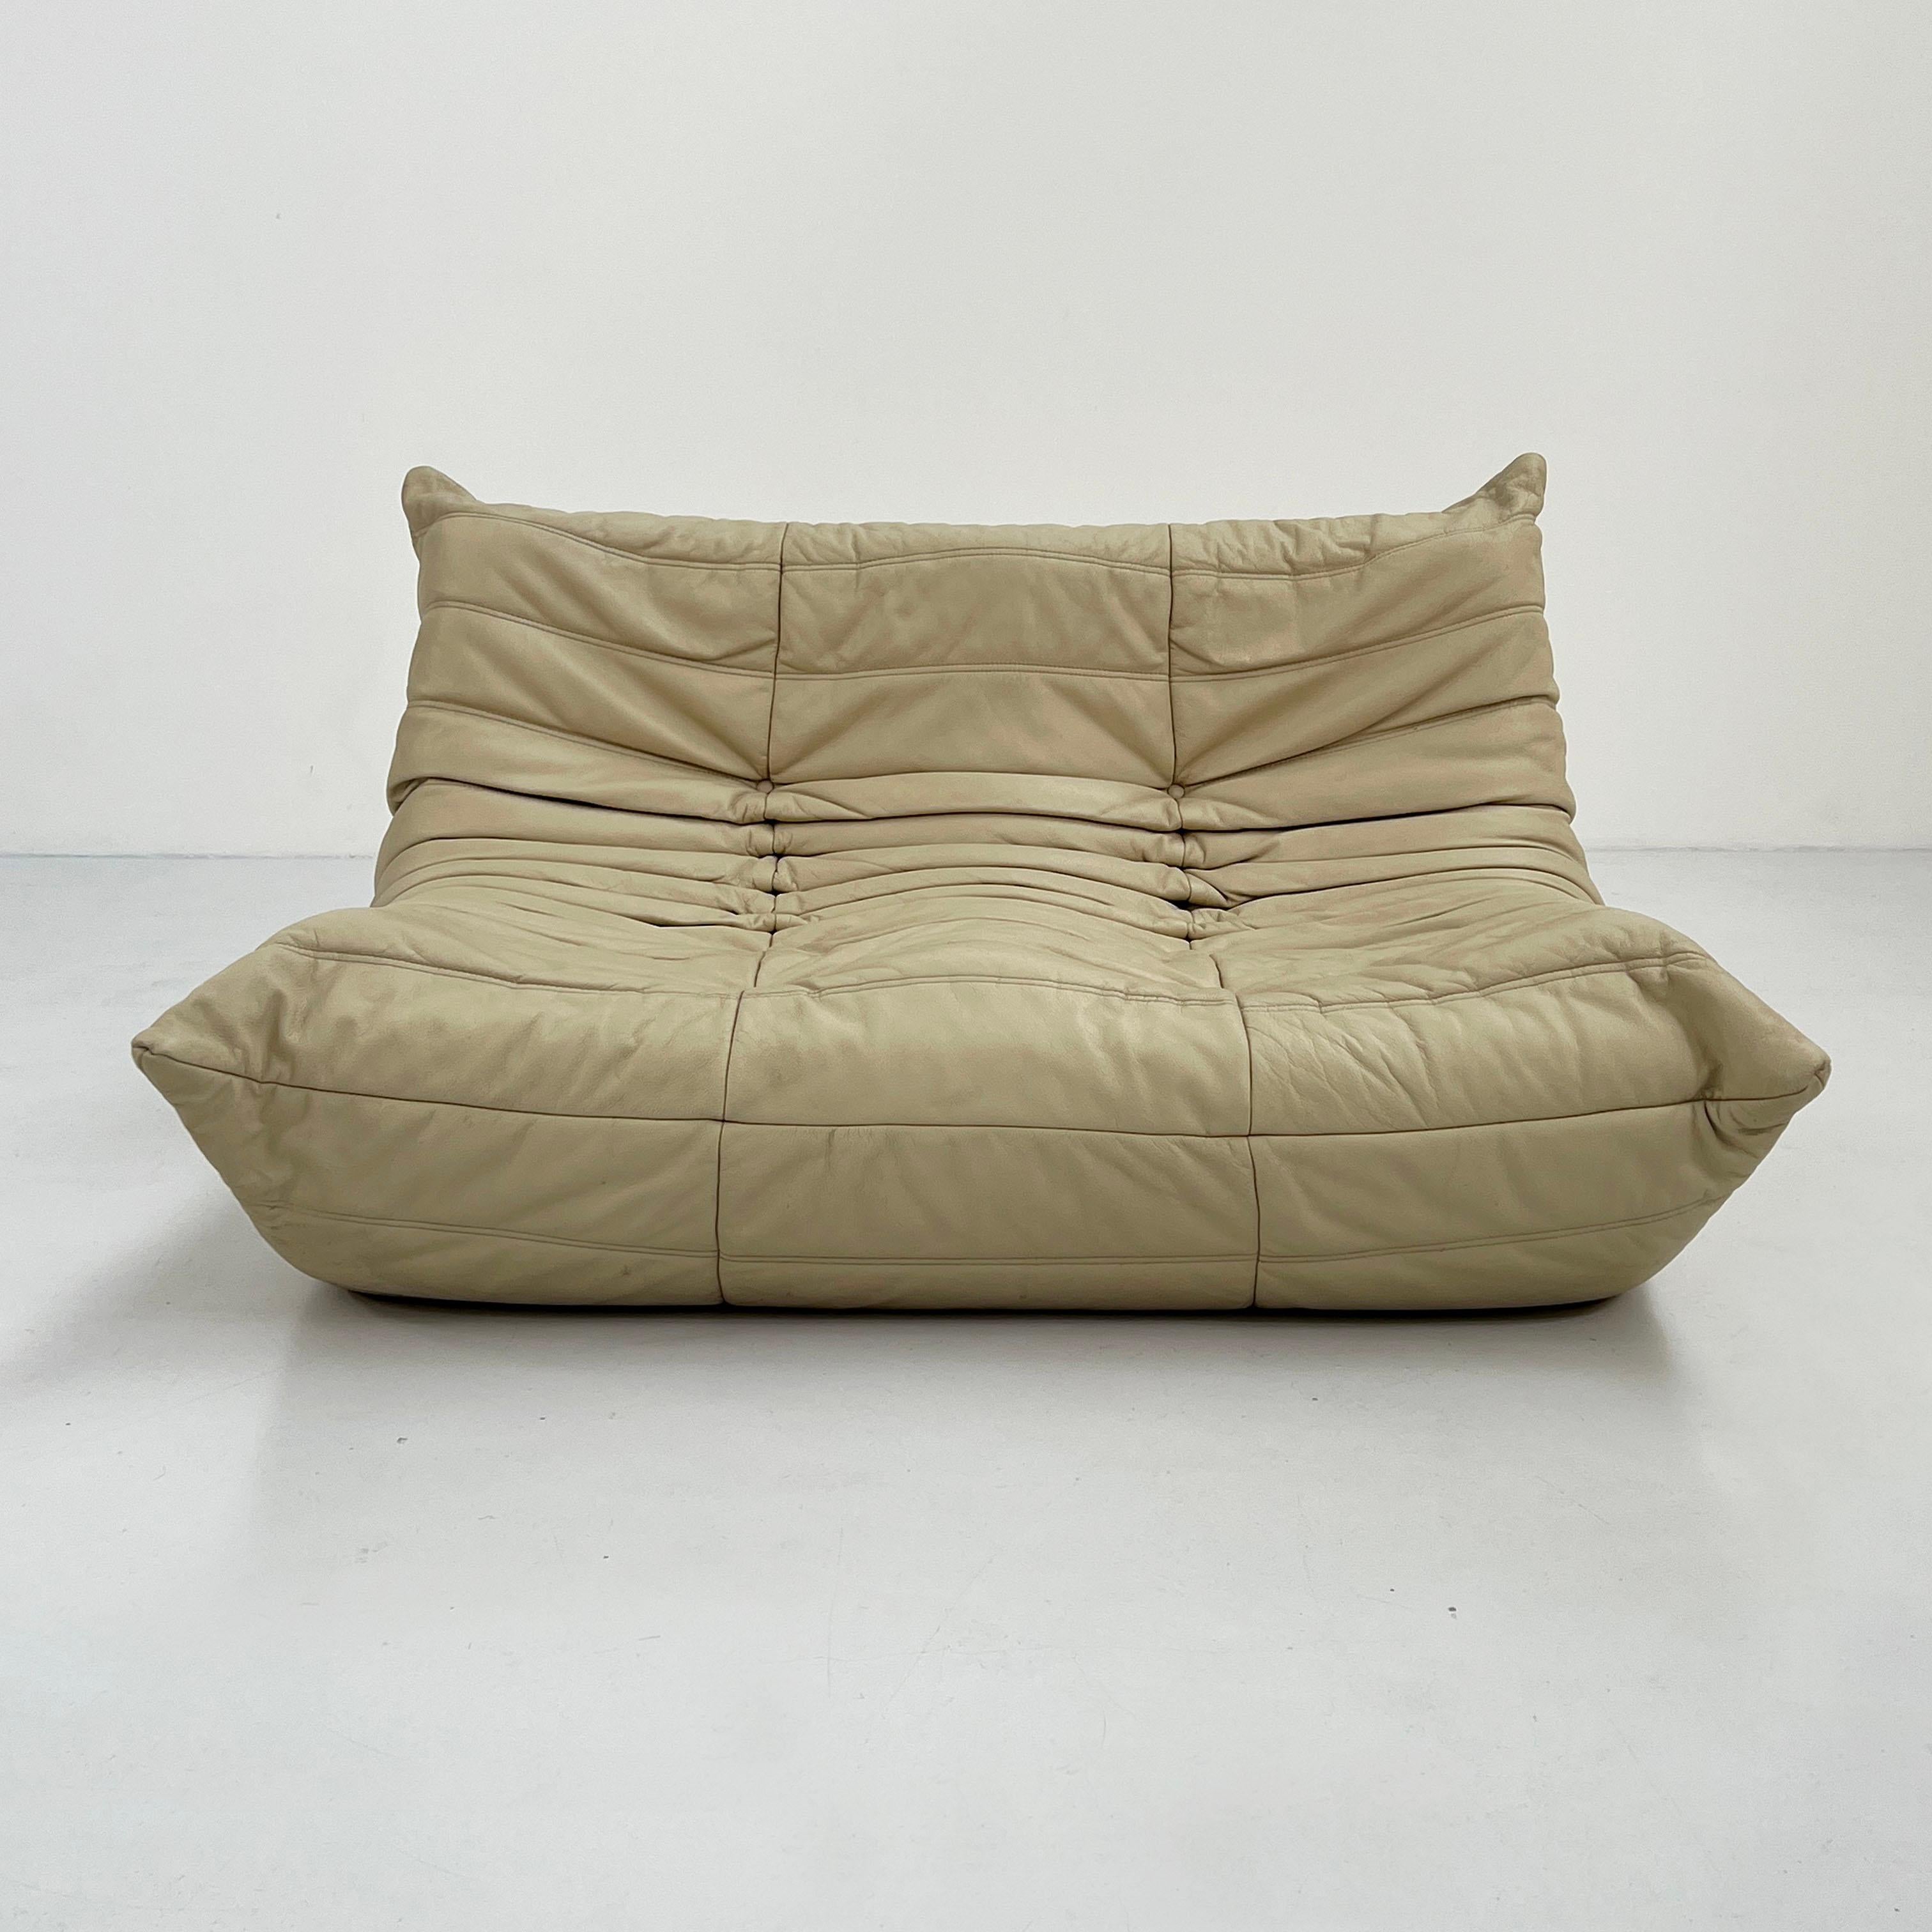 Italian 2-Seater Togo Sofa in Cream Leather by Michel Ducaroy for Ligne Roset, 1970s